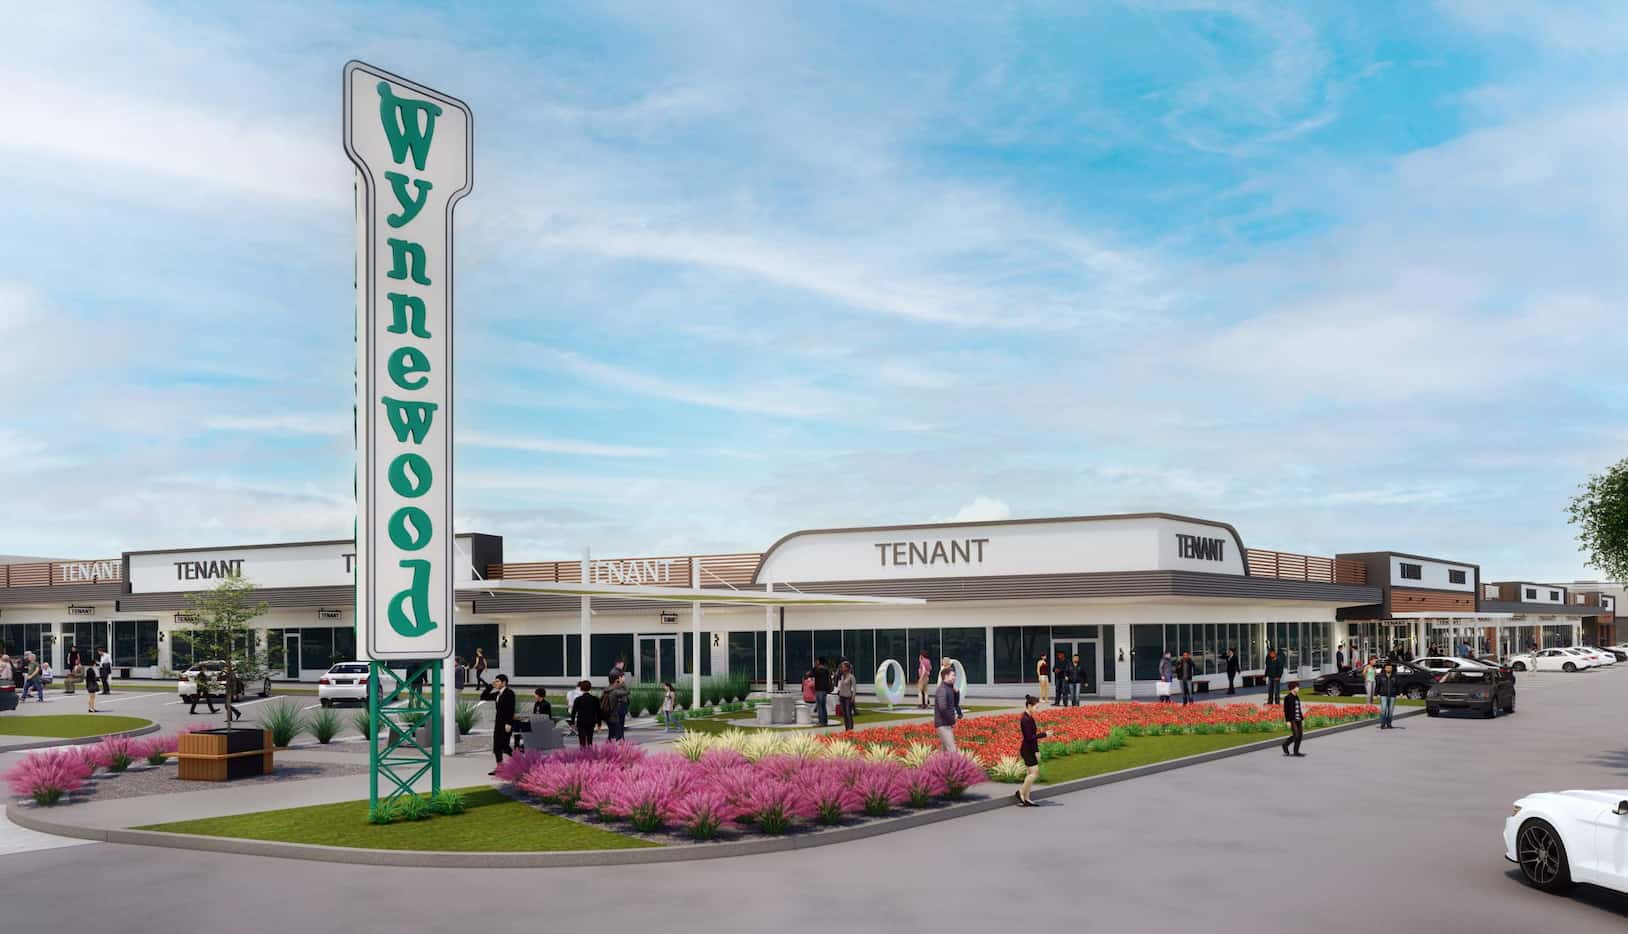 Rendering of a reimagined Wynnewood Village shopping center with more signs and walkways.